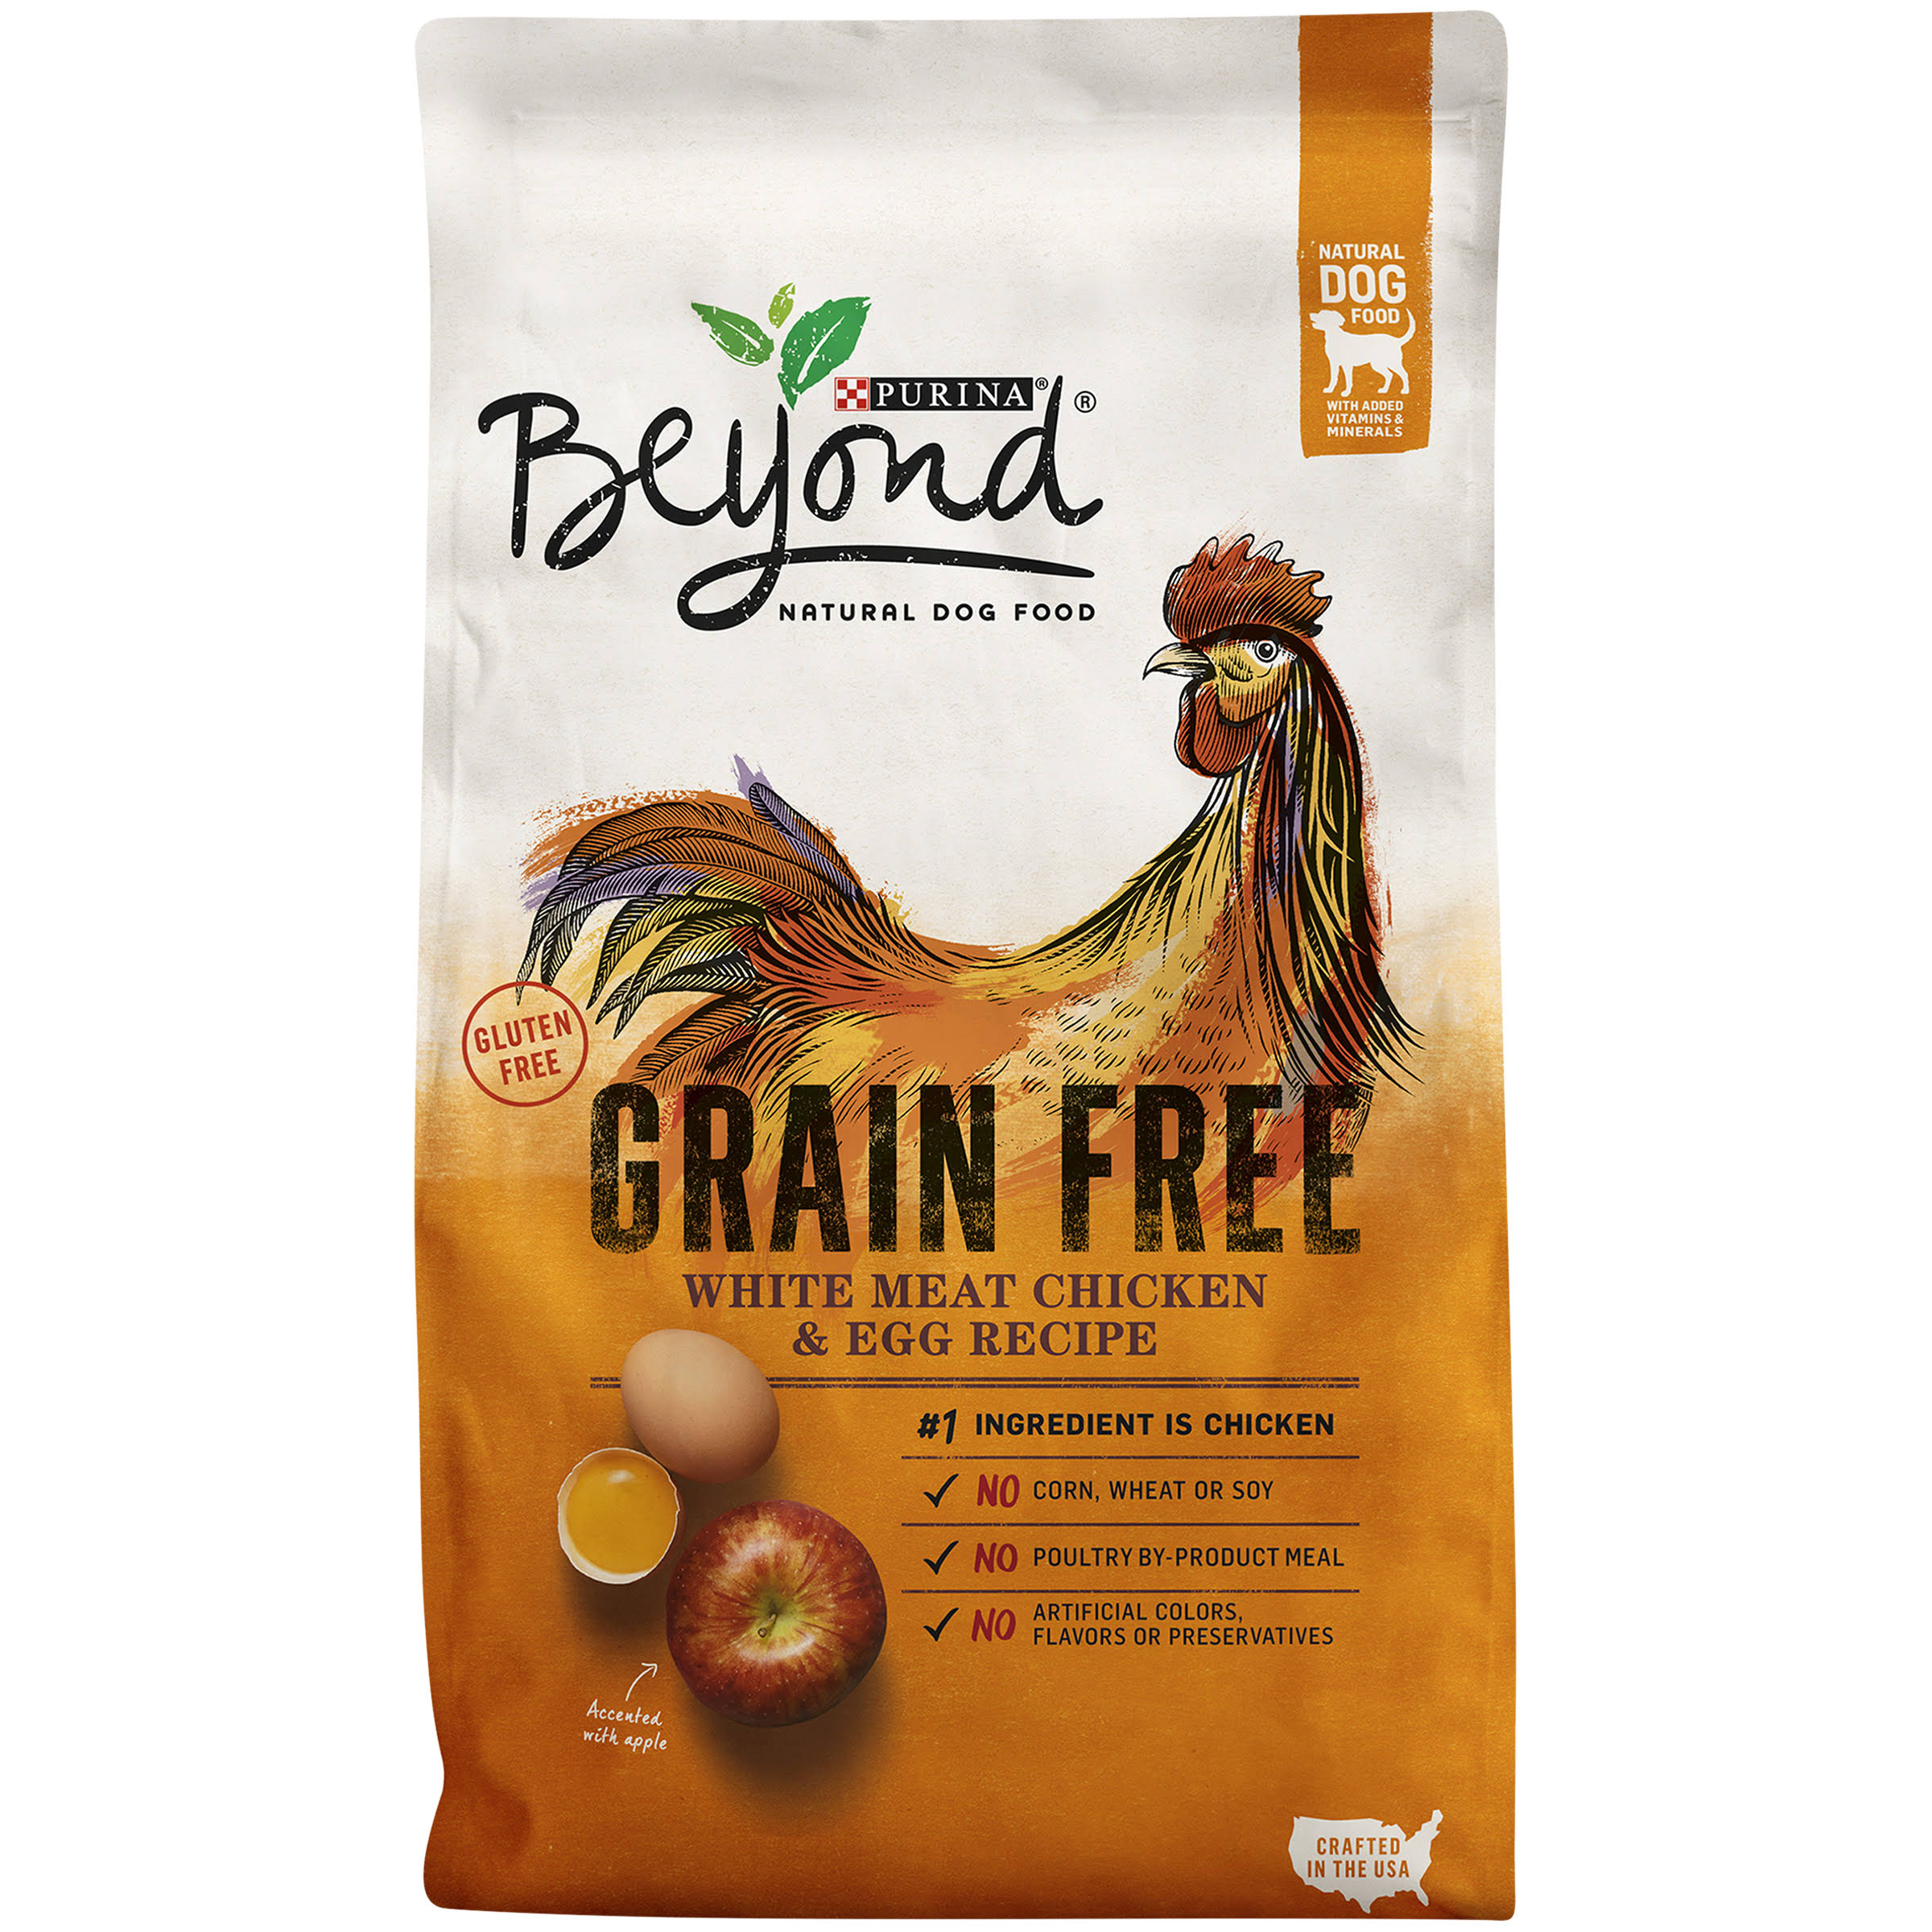 Purina Beyond Natural Dog Food - Grain Free, White Meat Chicken & Egg Recipe, 13lbs